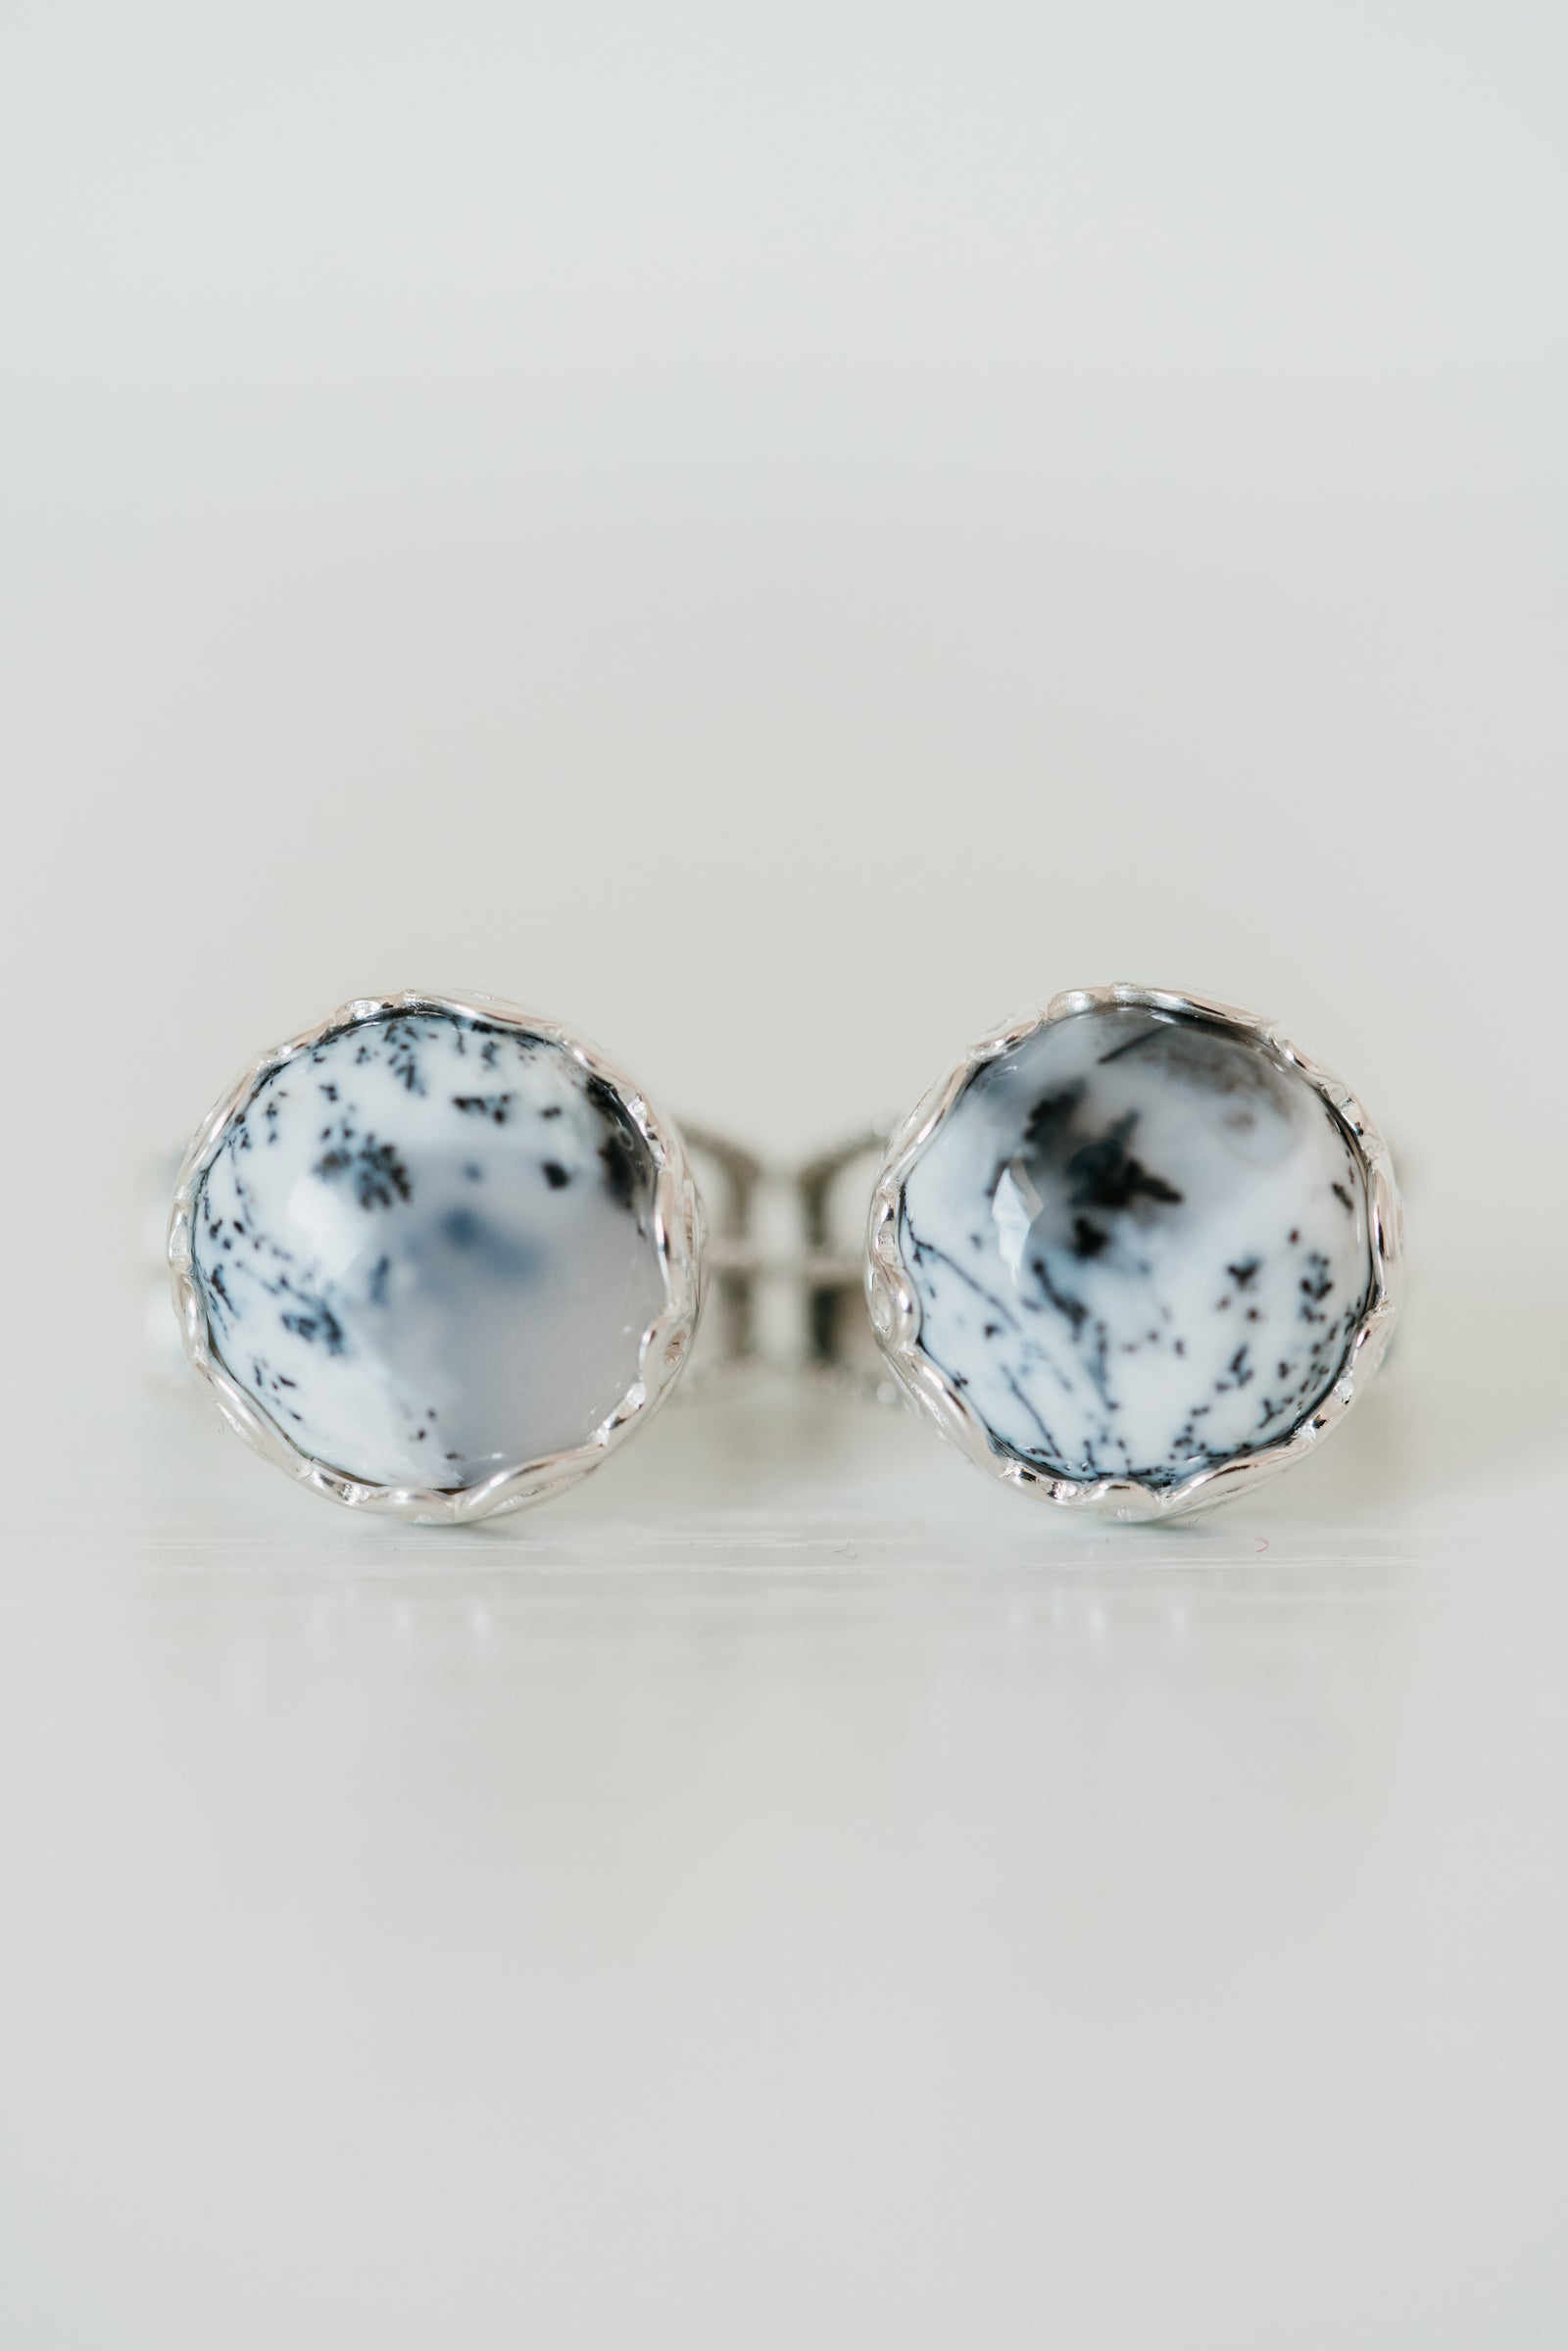 Pammy Ring | Dendritic Opal